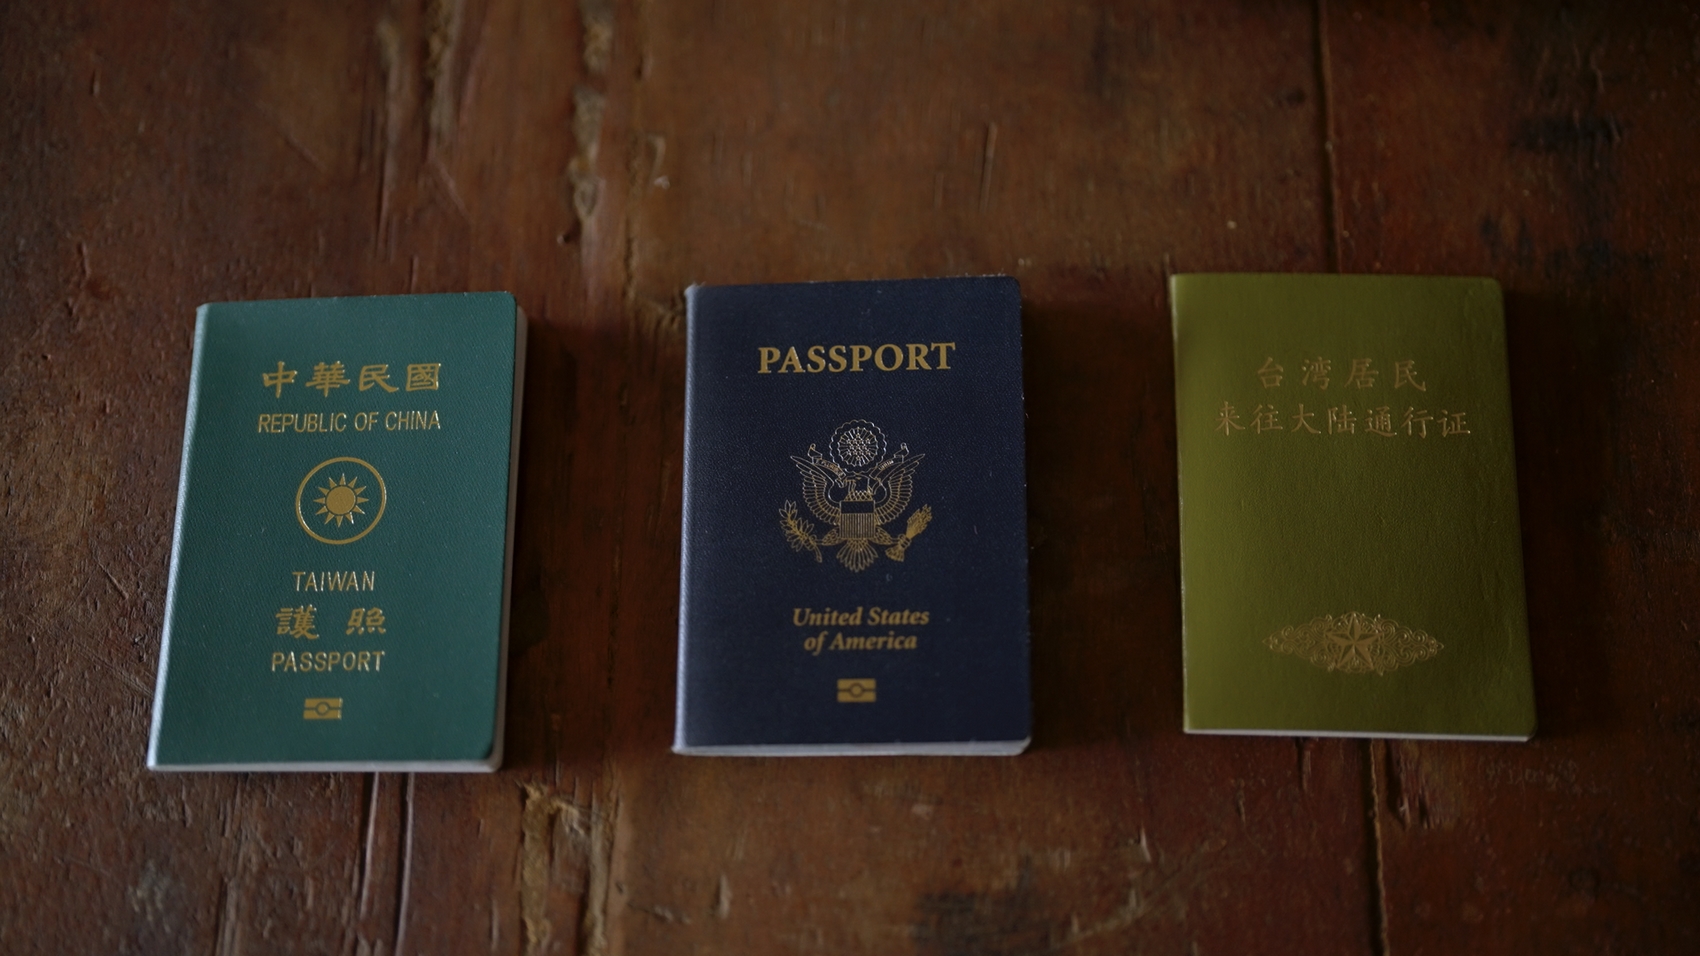 Director S. Leo Chiang’s three “passports” from left to right–one issued by Taiwan, one issued by the United States of America, and a Taiwan Compatriot Permit issued by the Chinese government.
Photo: Island in Between